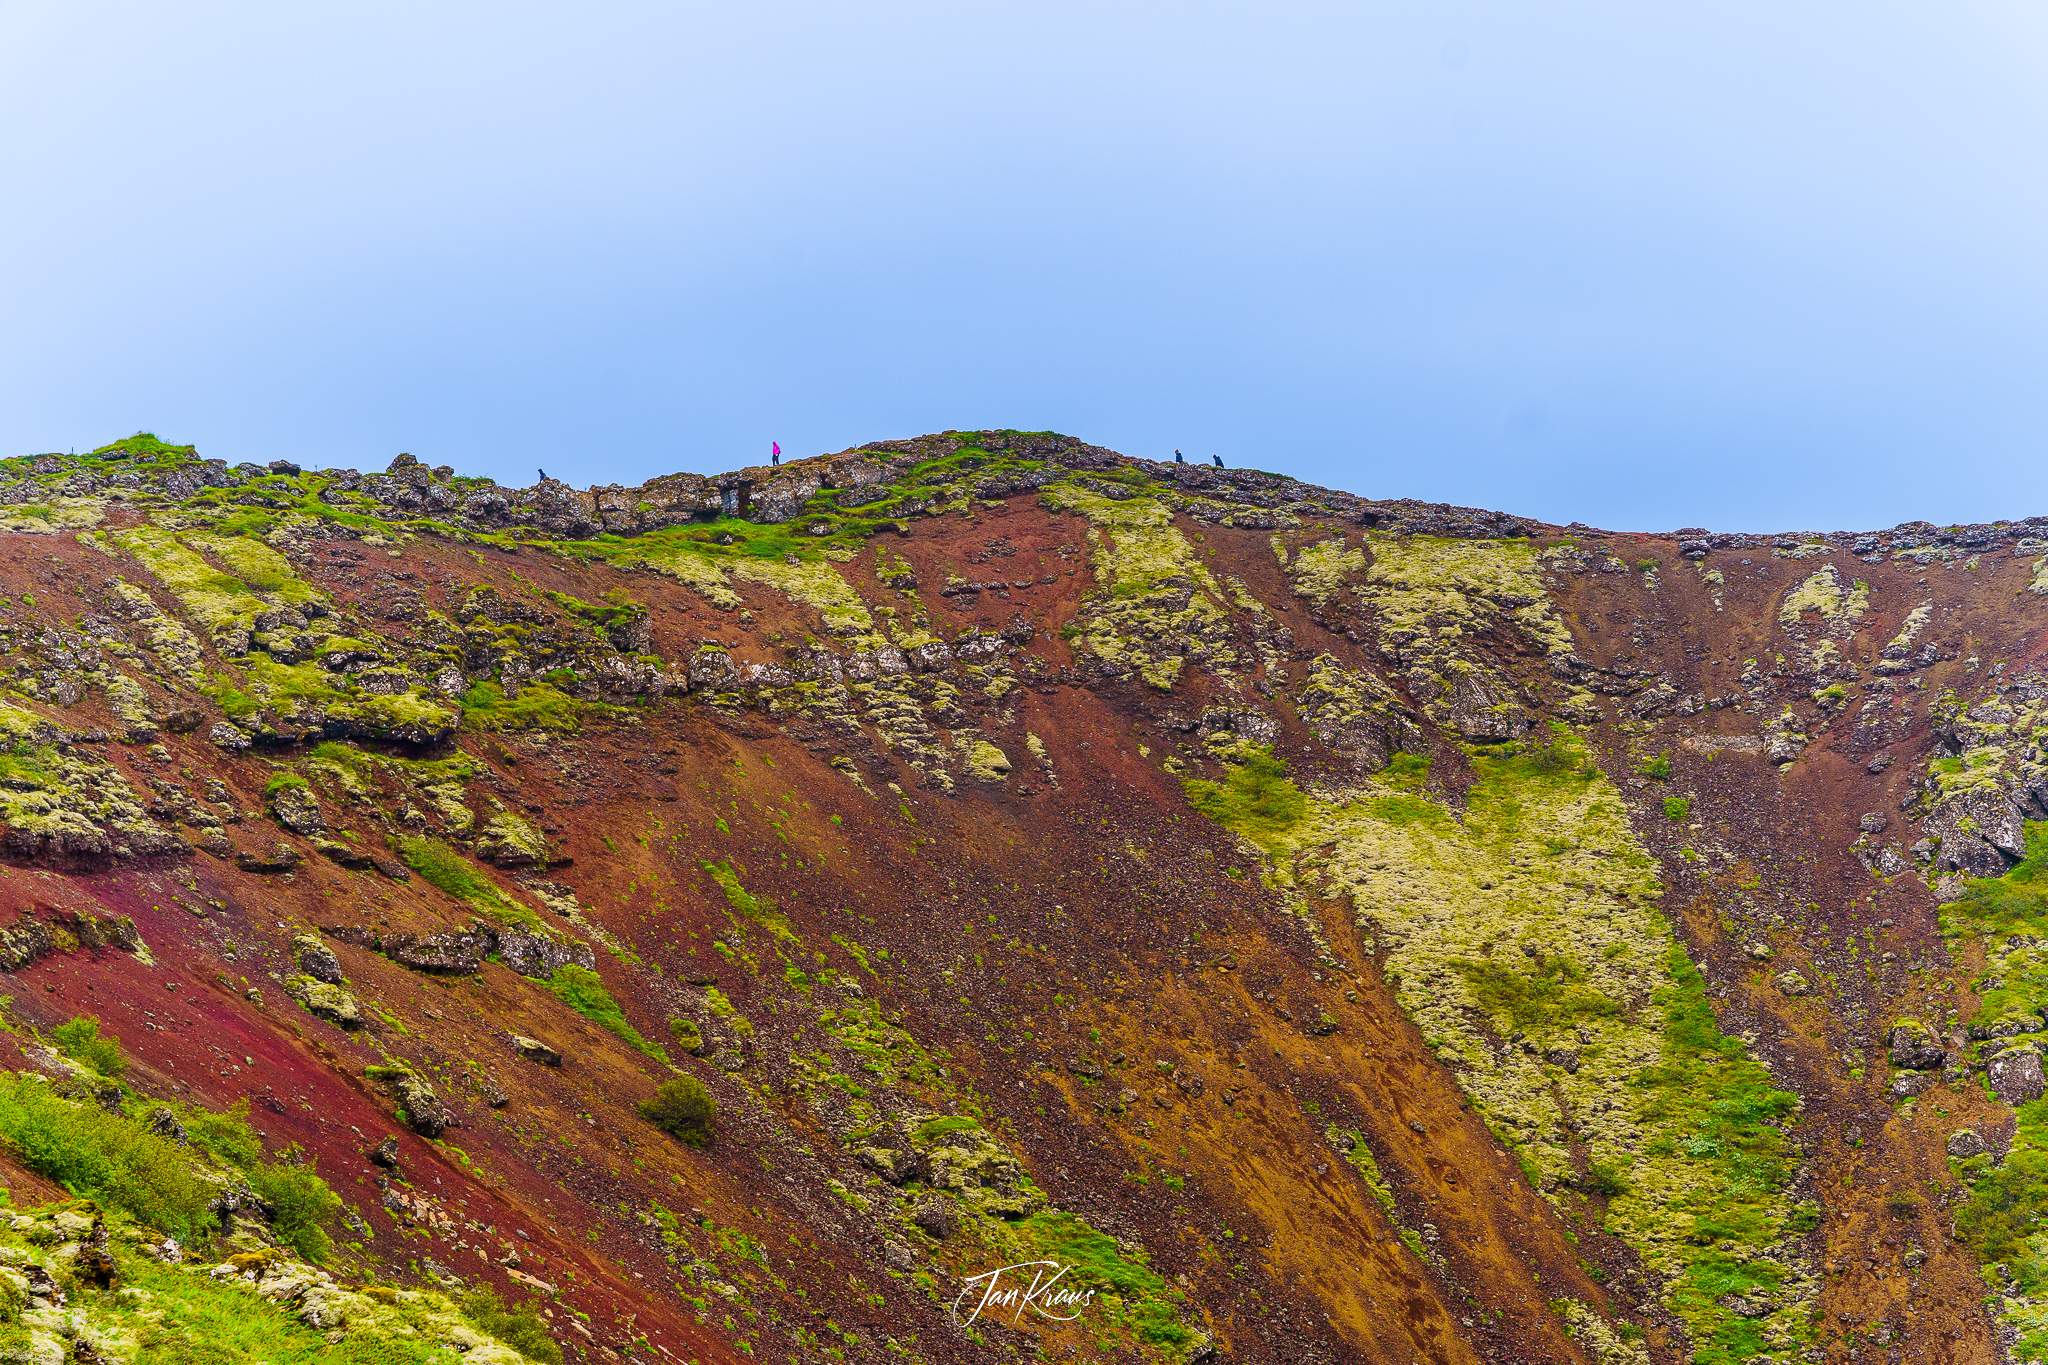 A view over the caldera's ridge of Crater, Iceland